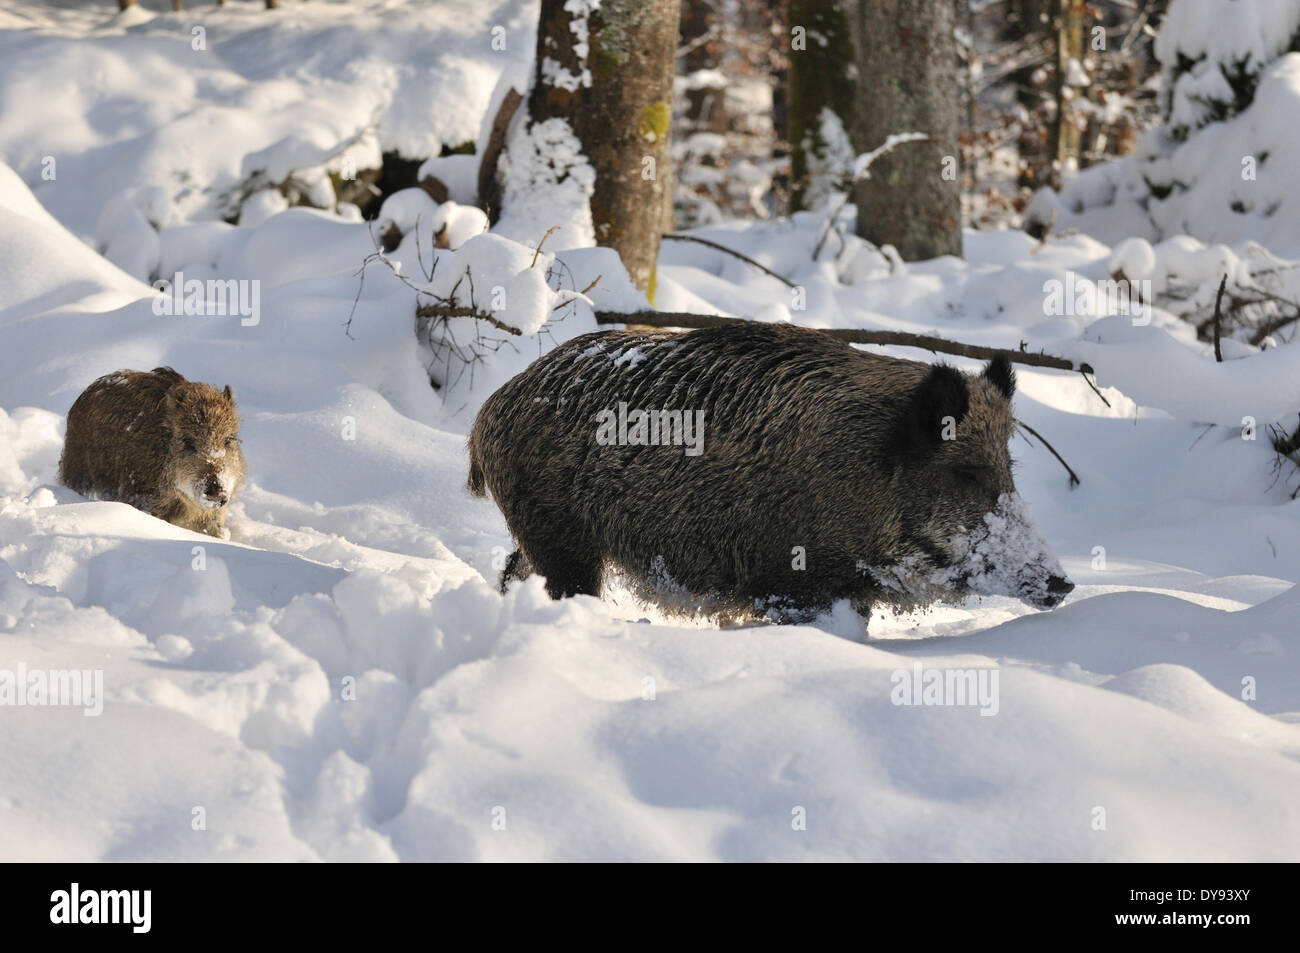 Wild boar Sus scrofa scrofa sow sows wild boars cloven-hoofed animal pigs pig vertebrates mammals wild boars snow spruce fores Stock Photo